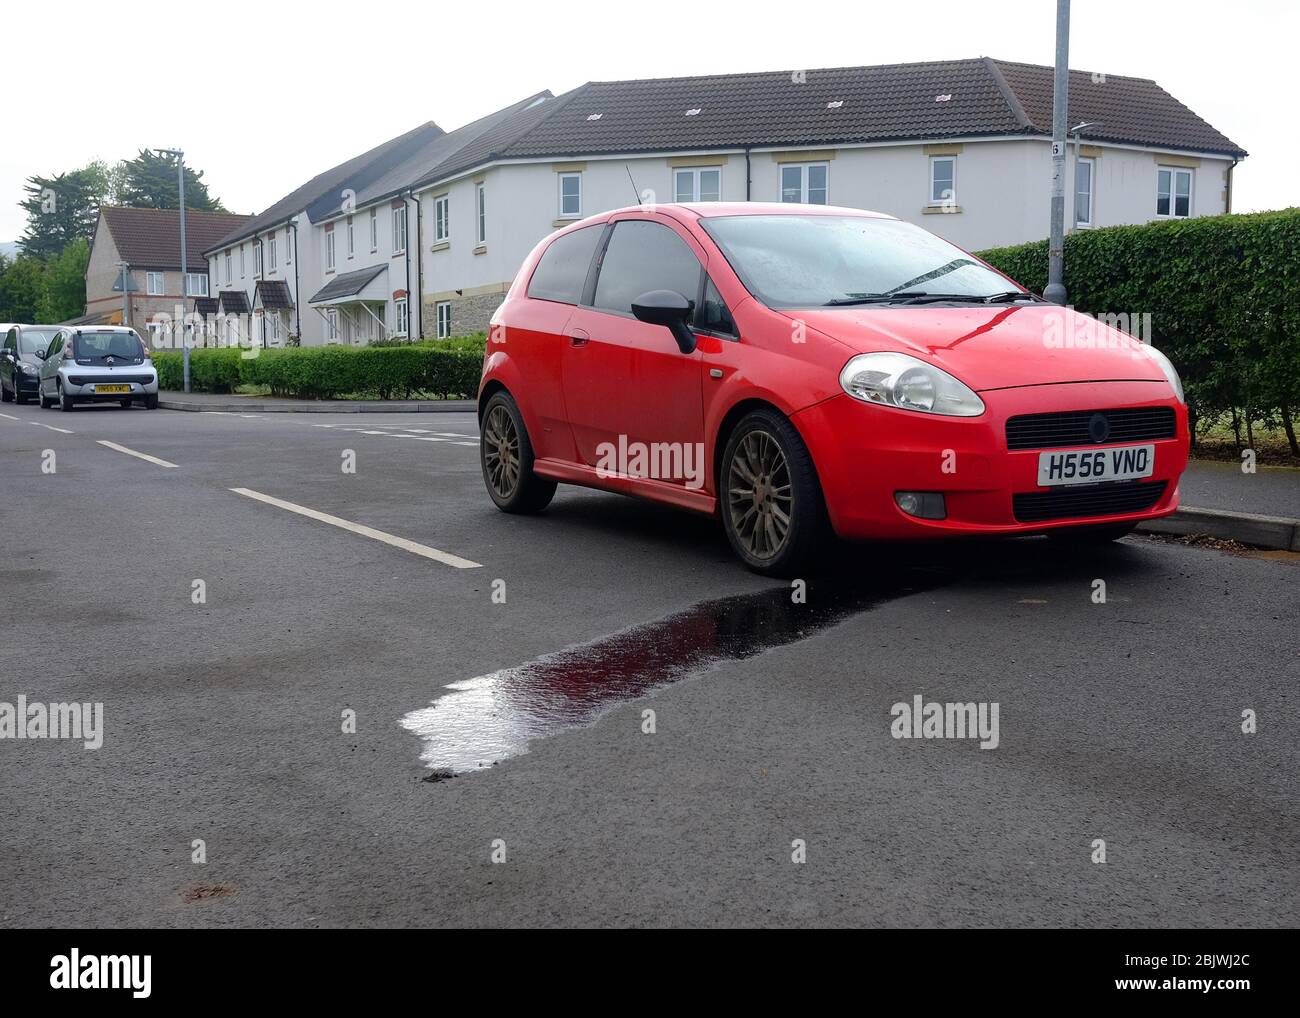 April 2020 - Oil leaking out of an old Fiat Punto. Stock Photo